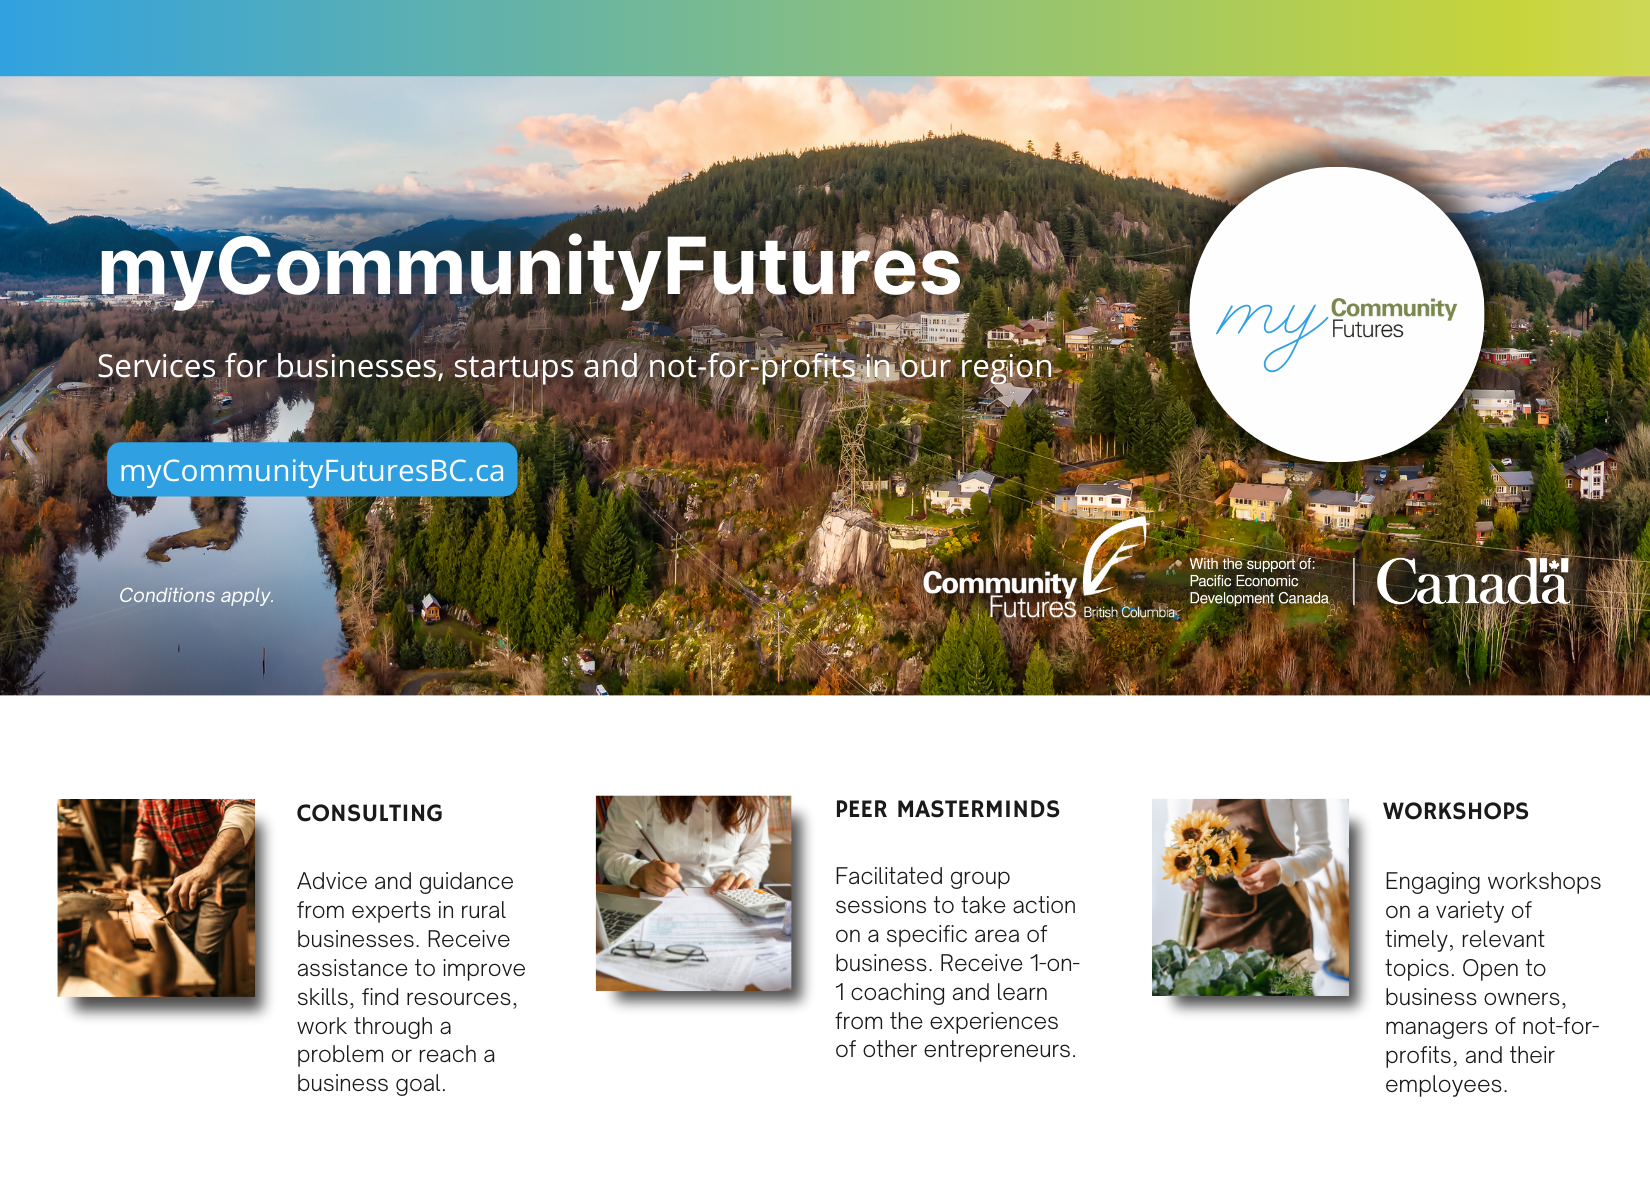 myCommunityFutures BC services for businesses, startups and not for profits